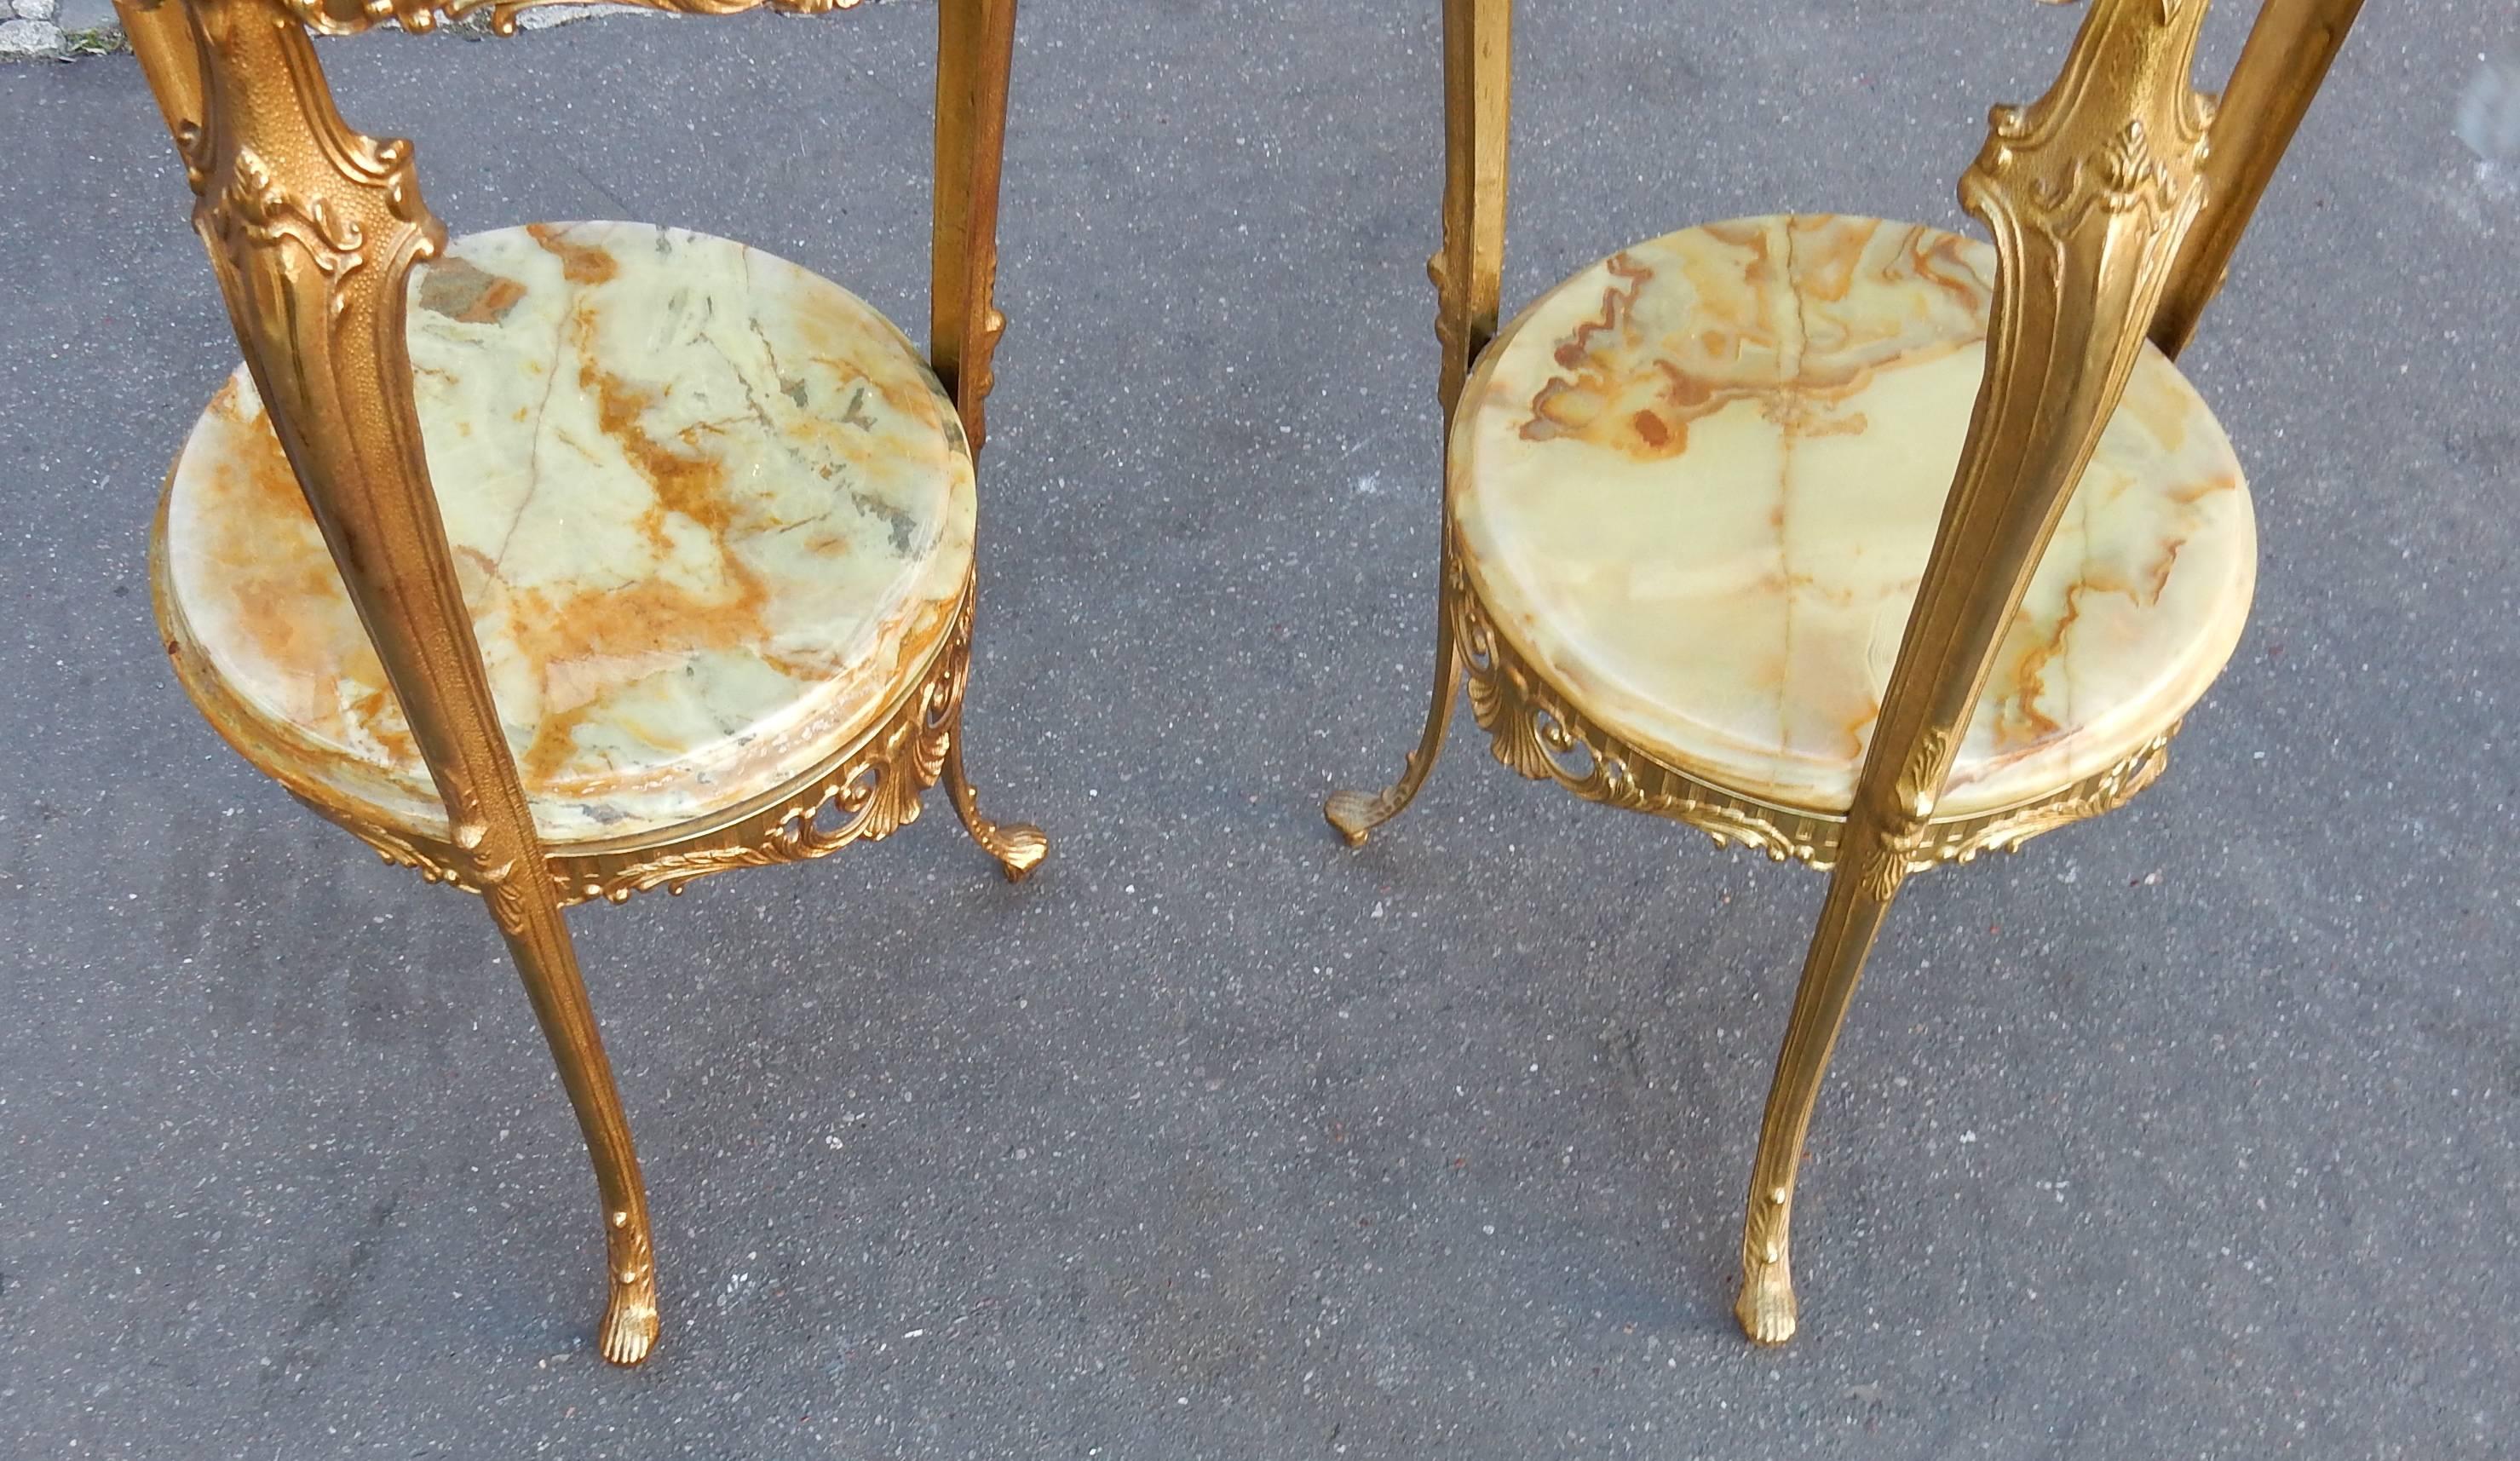 Pair of tripod saddles, style Louis XV, gilded bronze, diameter lower plate 32 cm, good condition